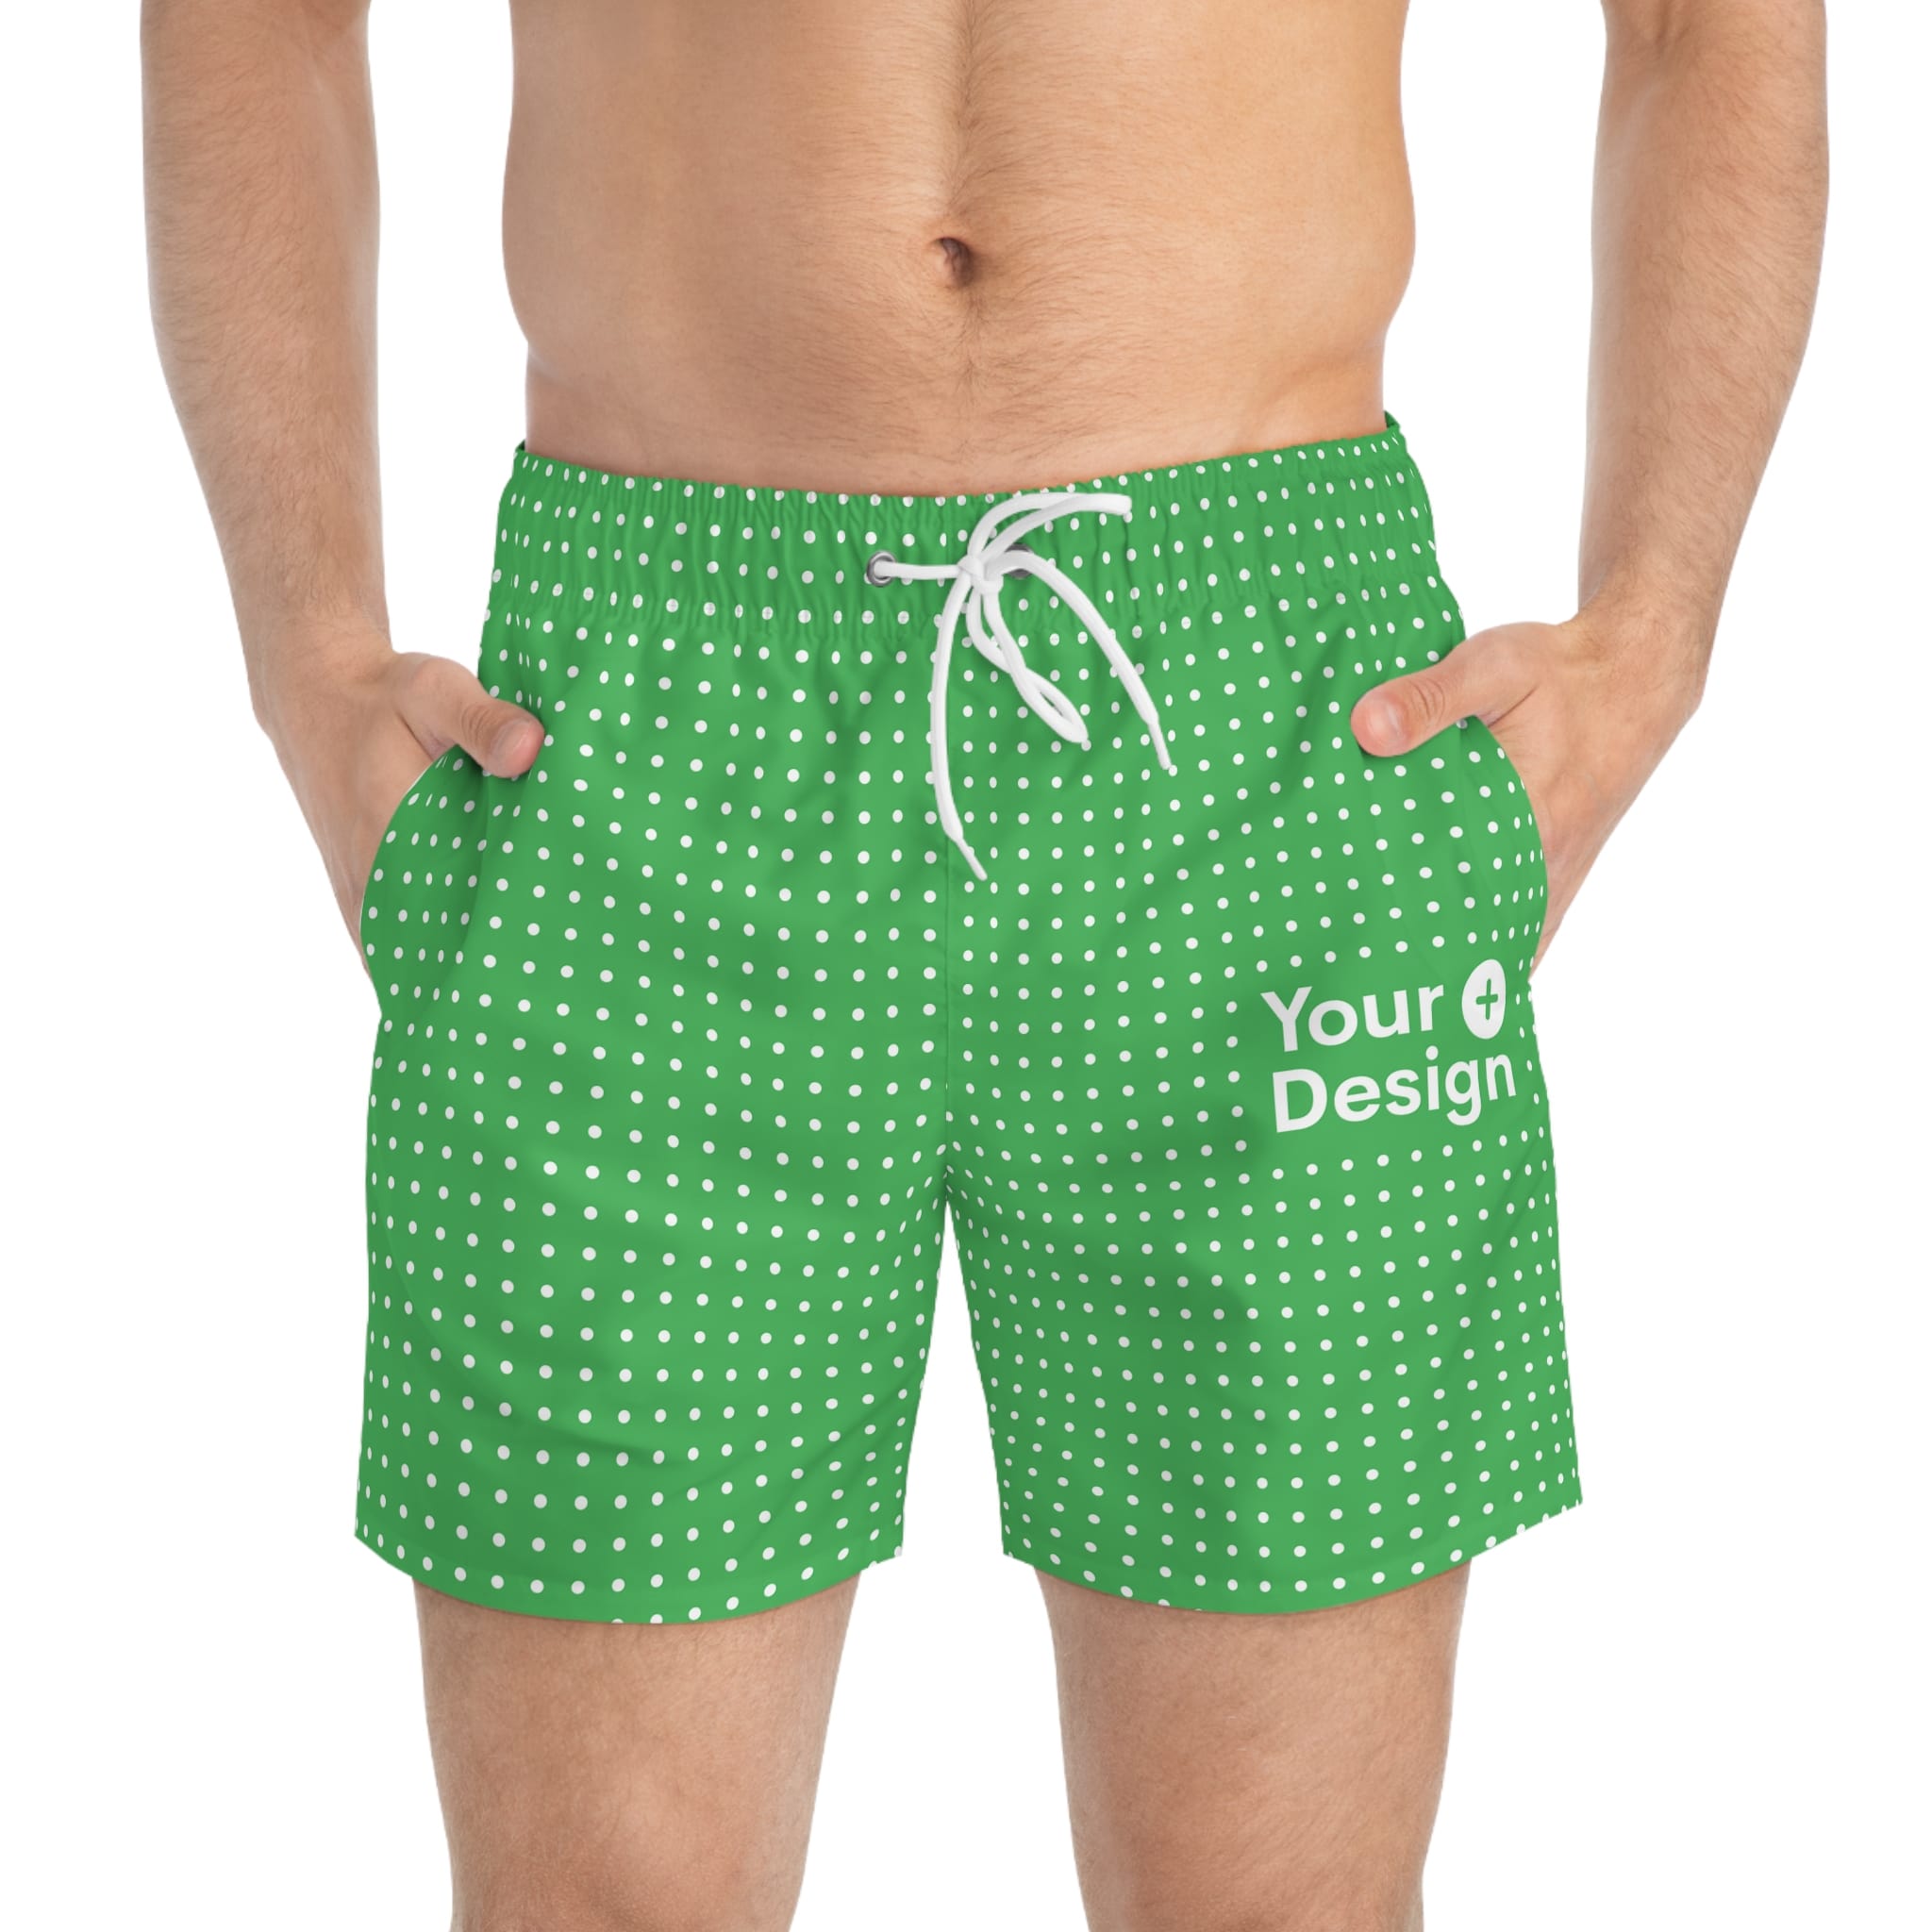 A man with green dotted swimming briefs on and “Your Design+” logo.